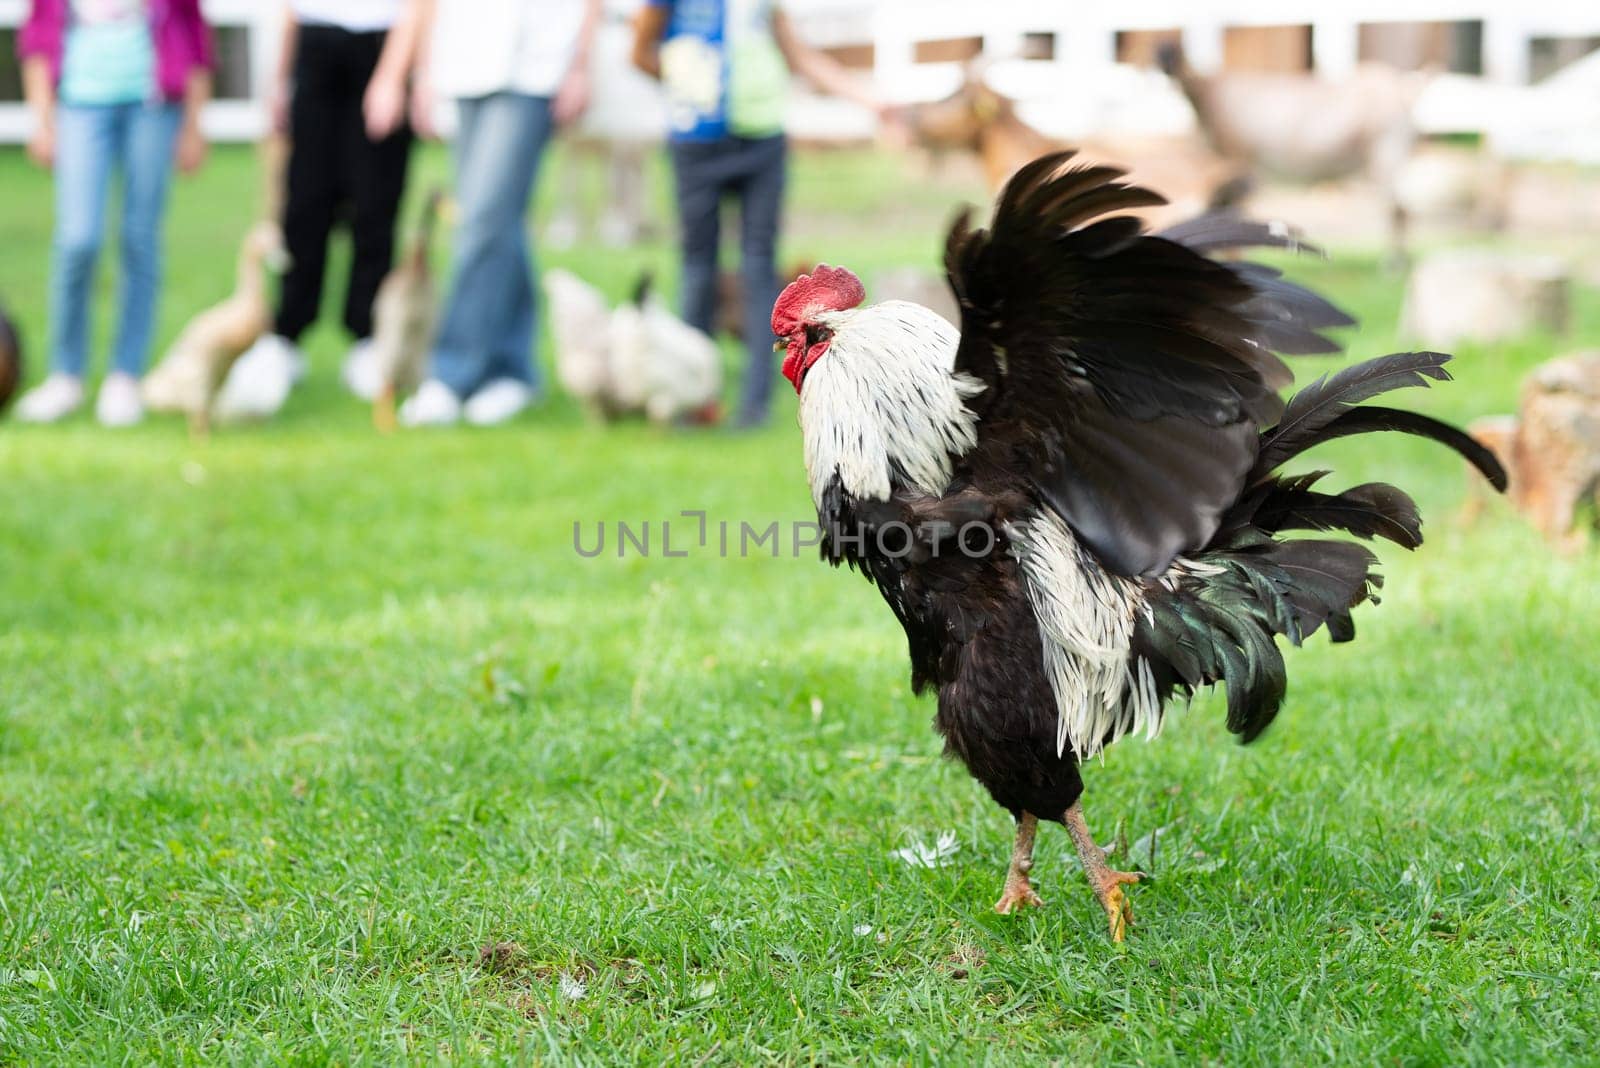 Rooster with black and white feathers in Lithuania by padgurskas